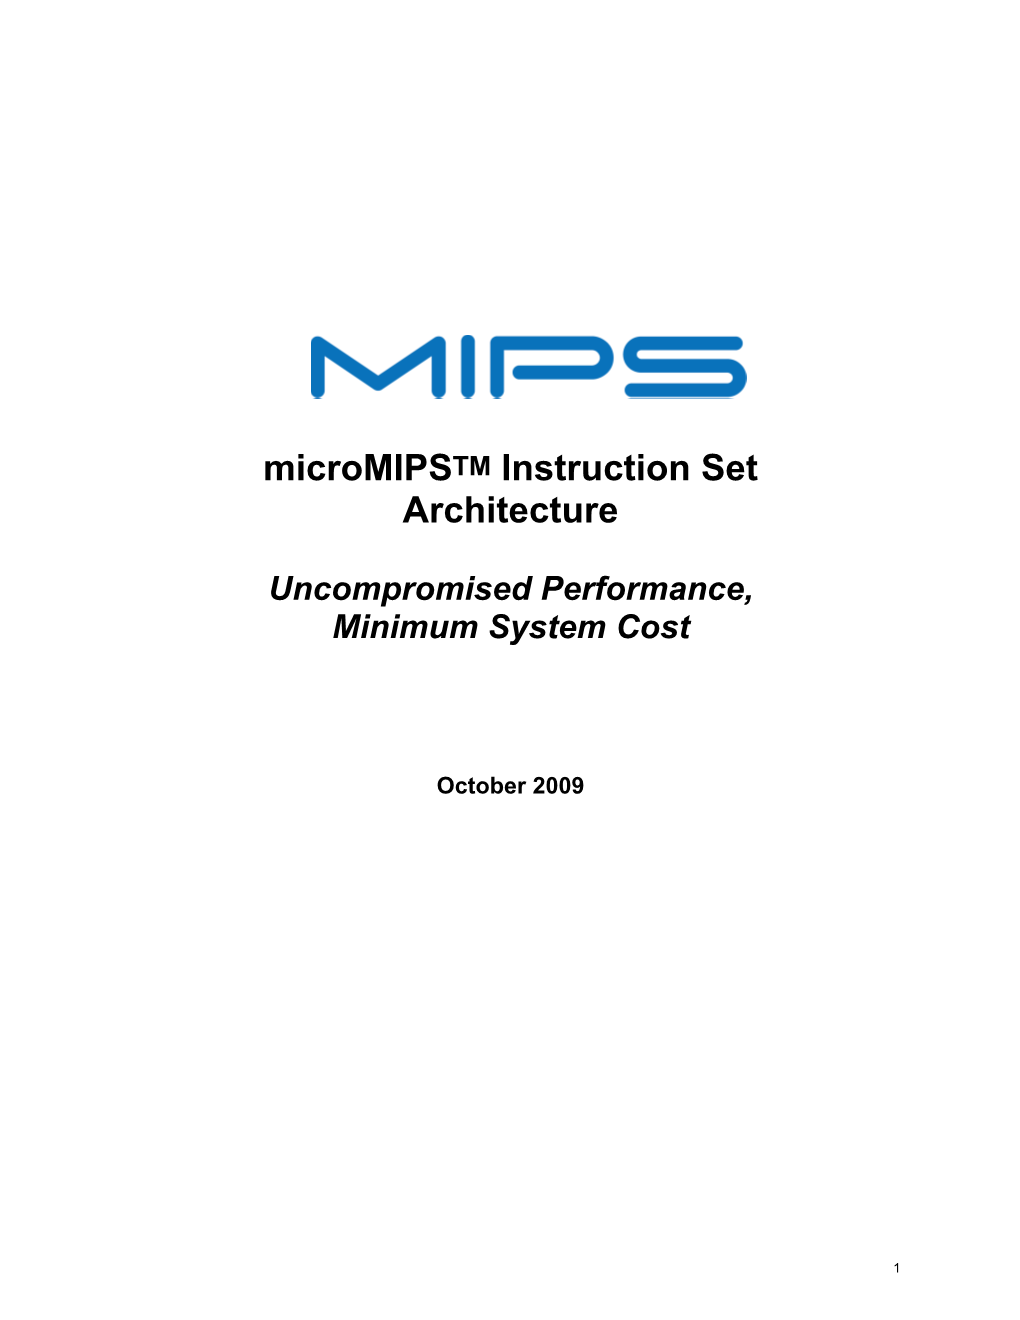 Micromips™ Instruction Set Architecture